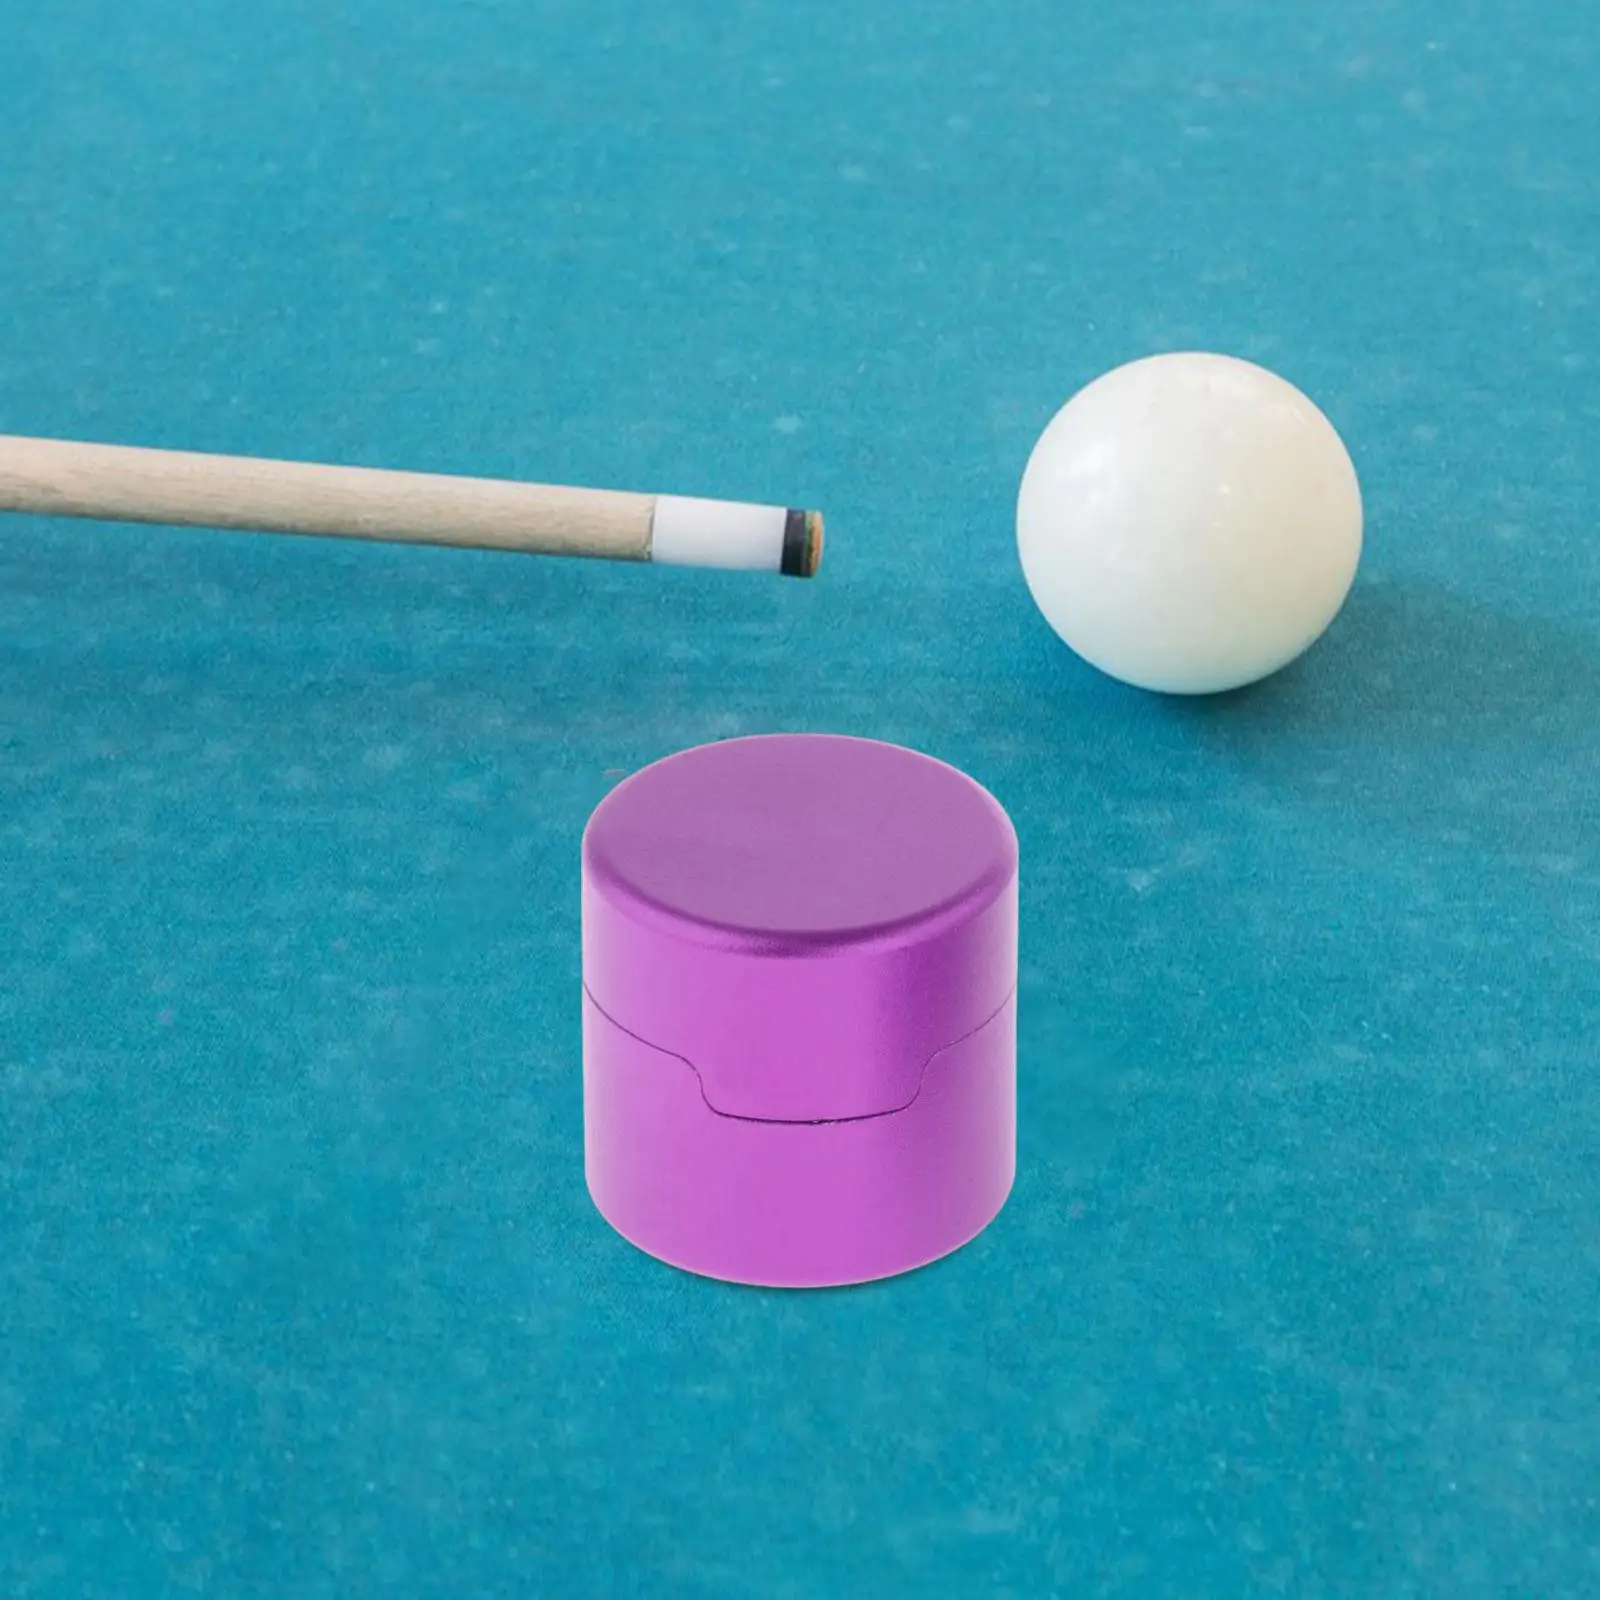 Pool Cue Chalk Holder Cup Lightweight Box Easy to Use Billiards Accessories